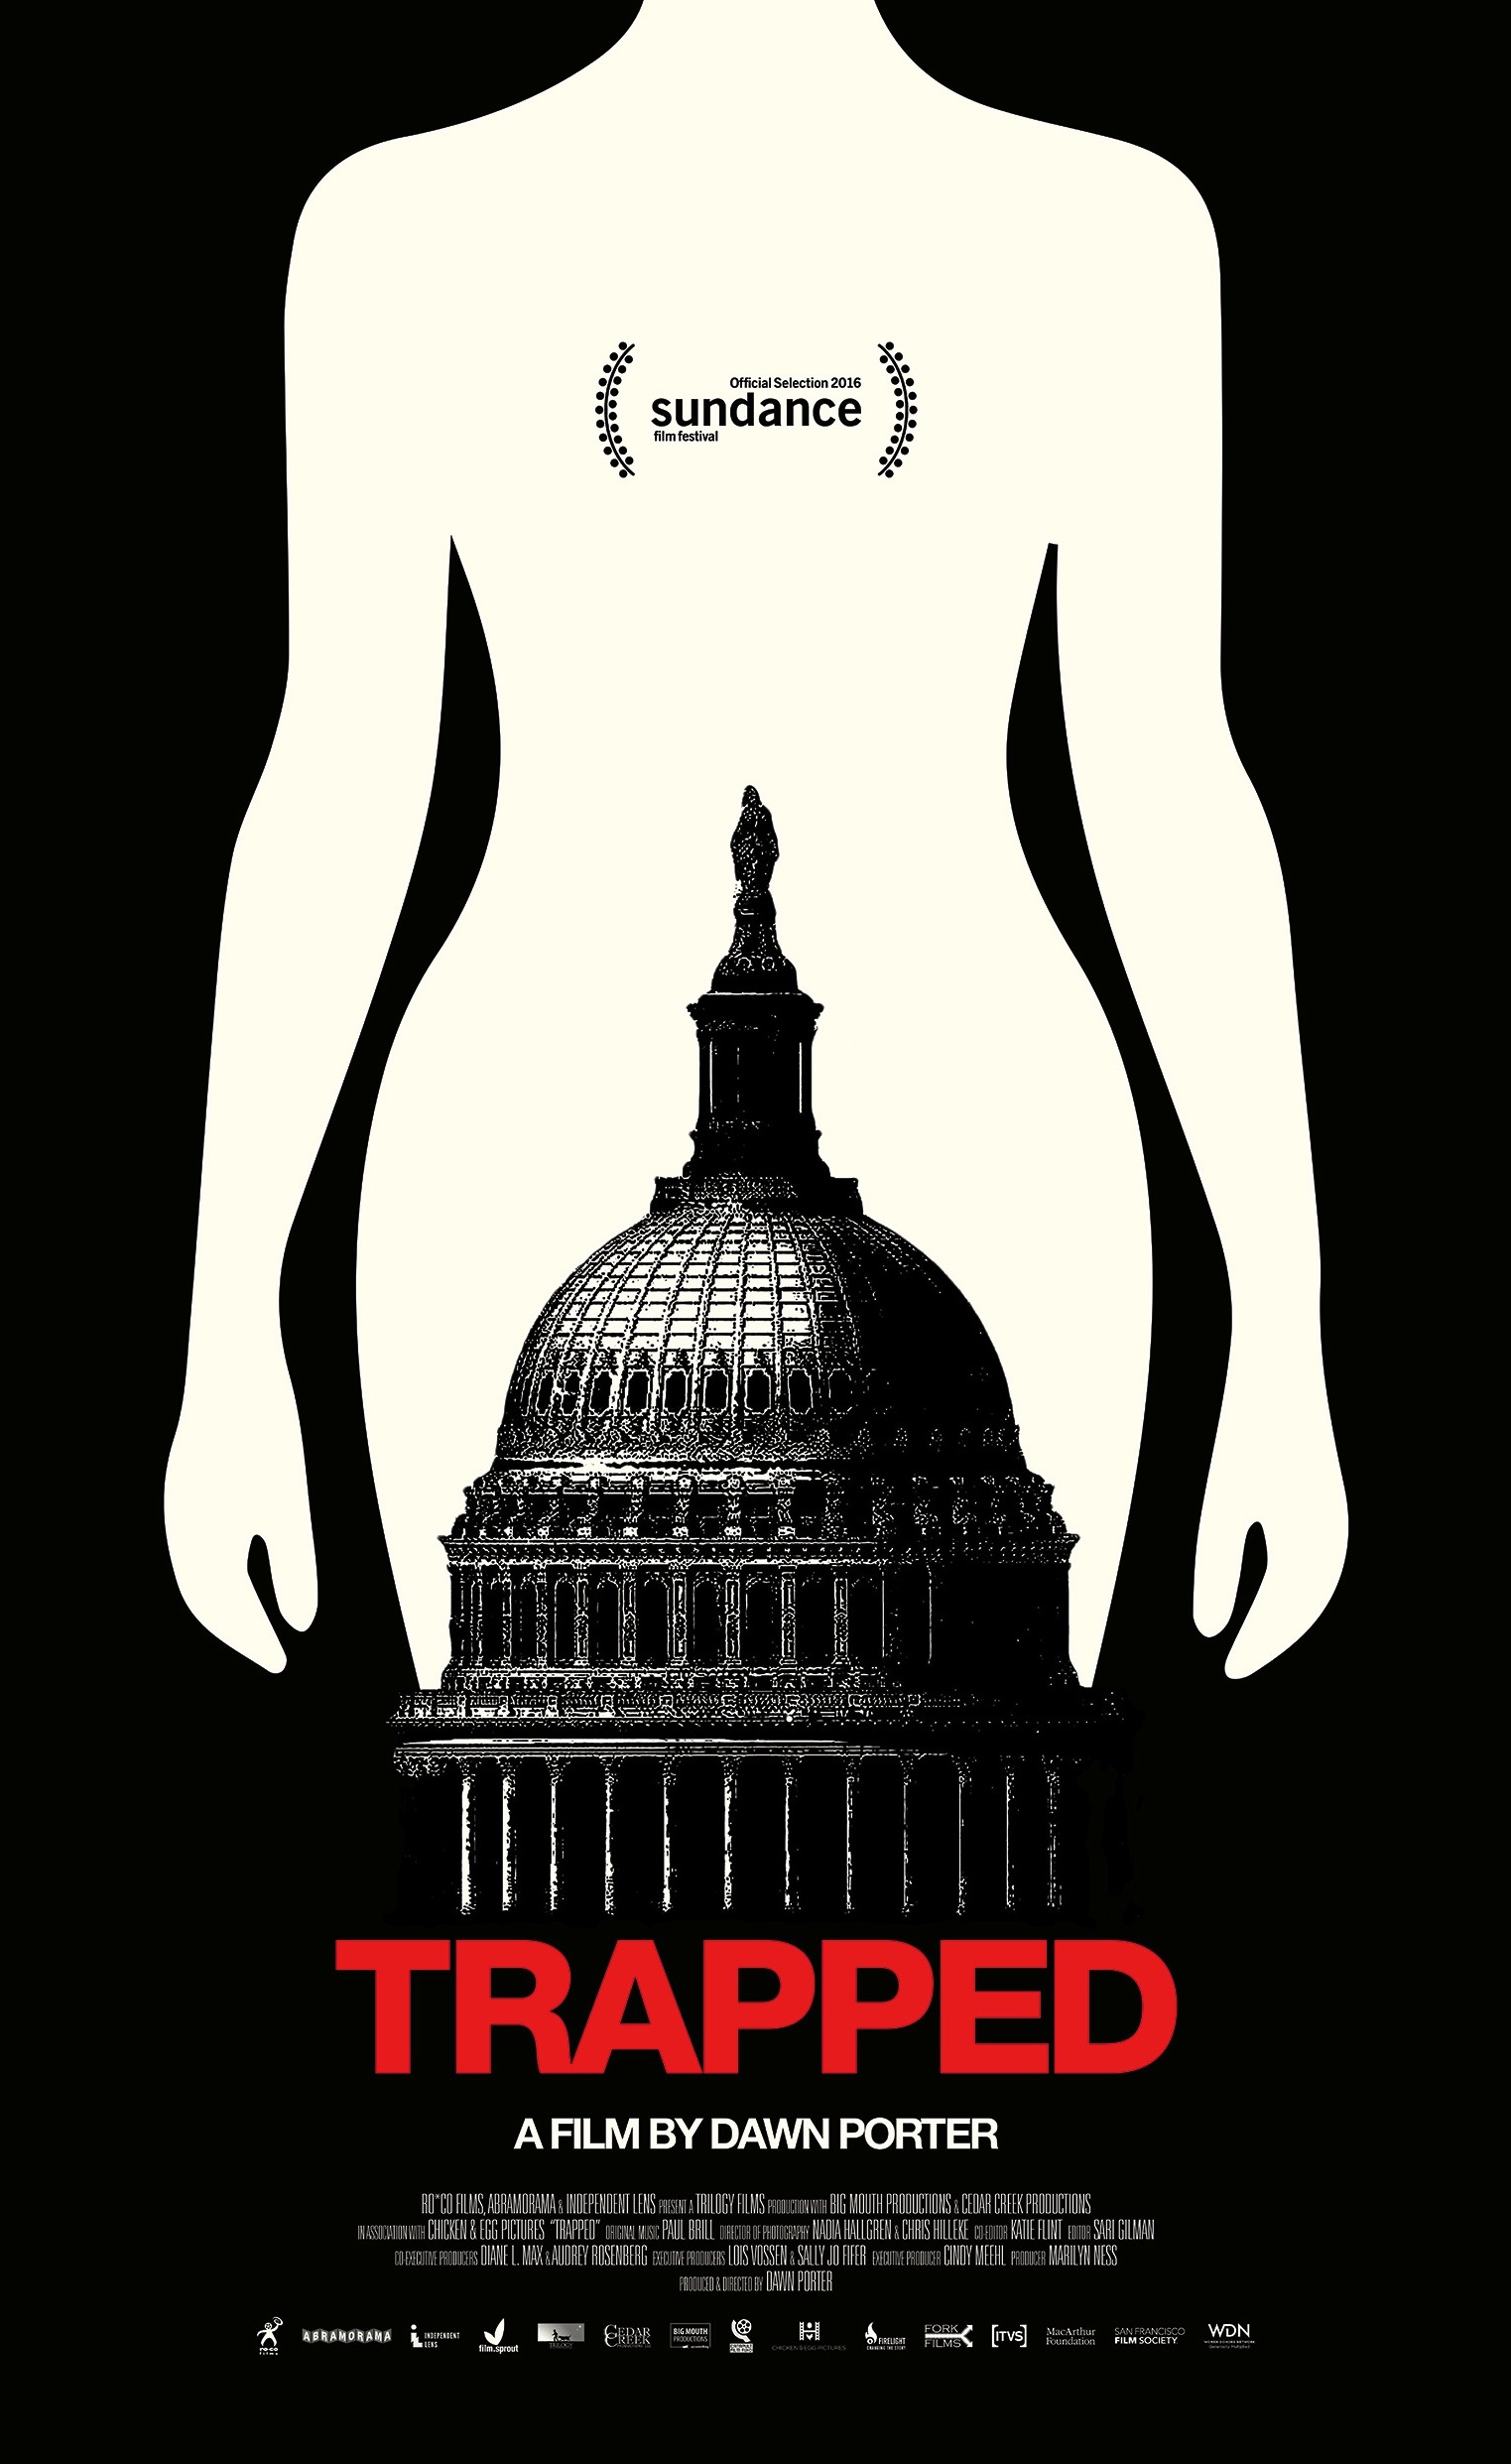 Interview: Dawn Porter on the Abortion Documentary “Trapped”